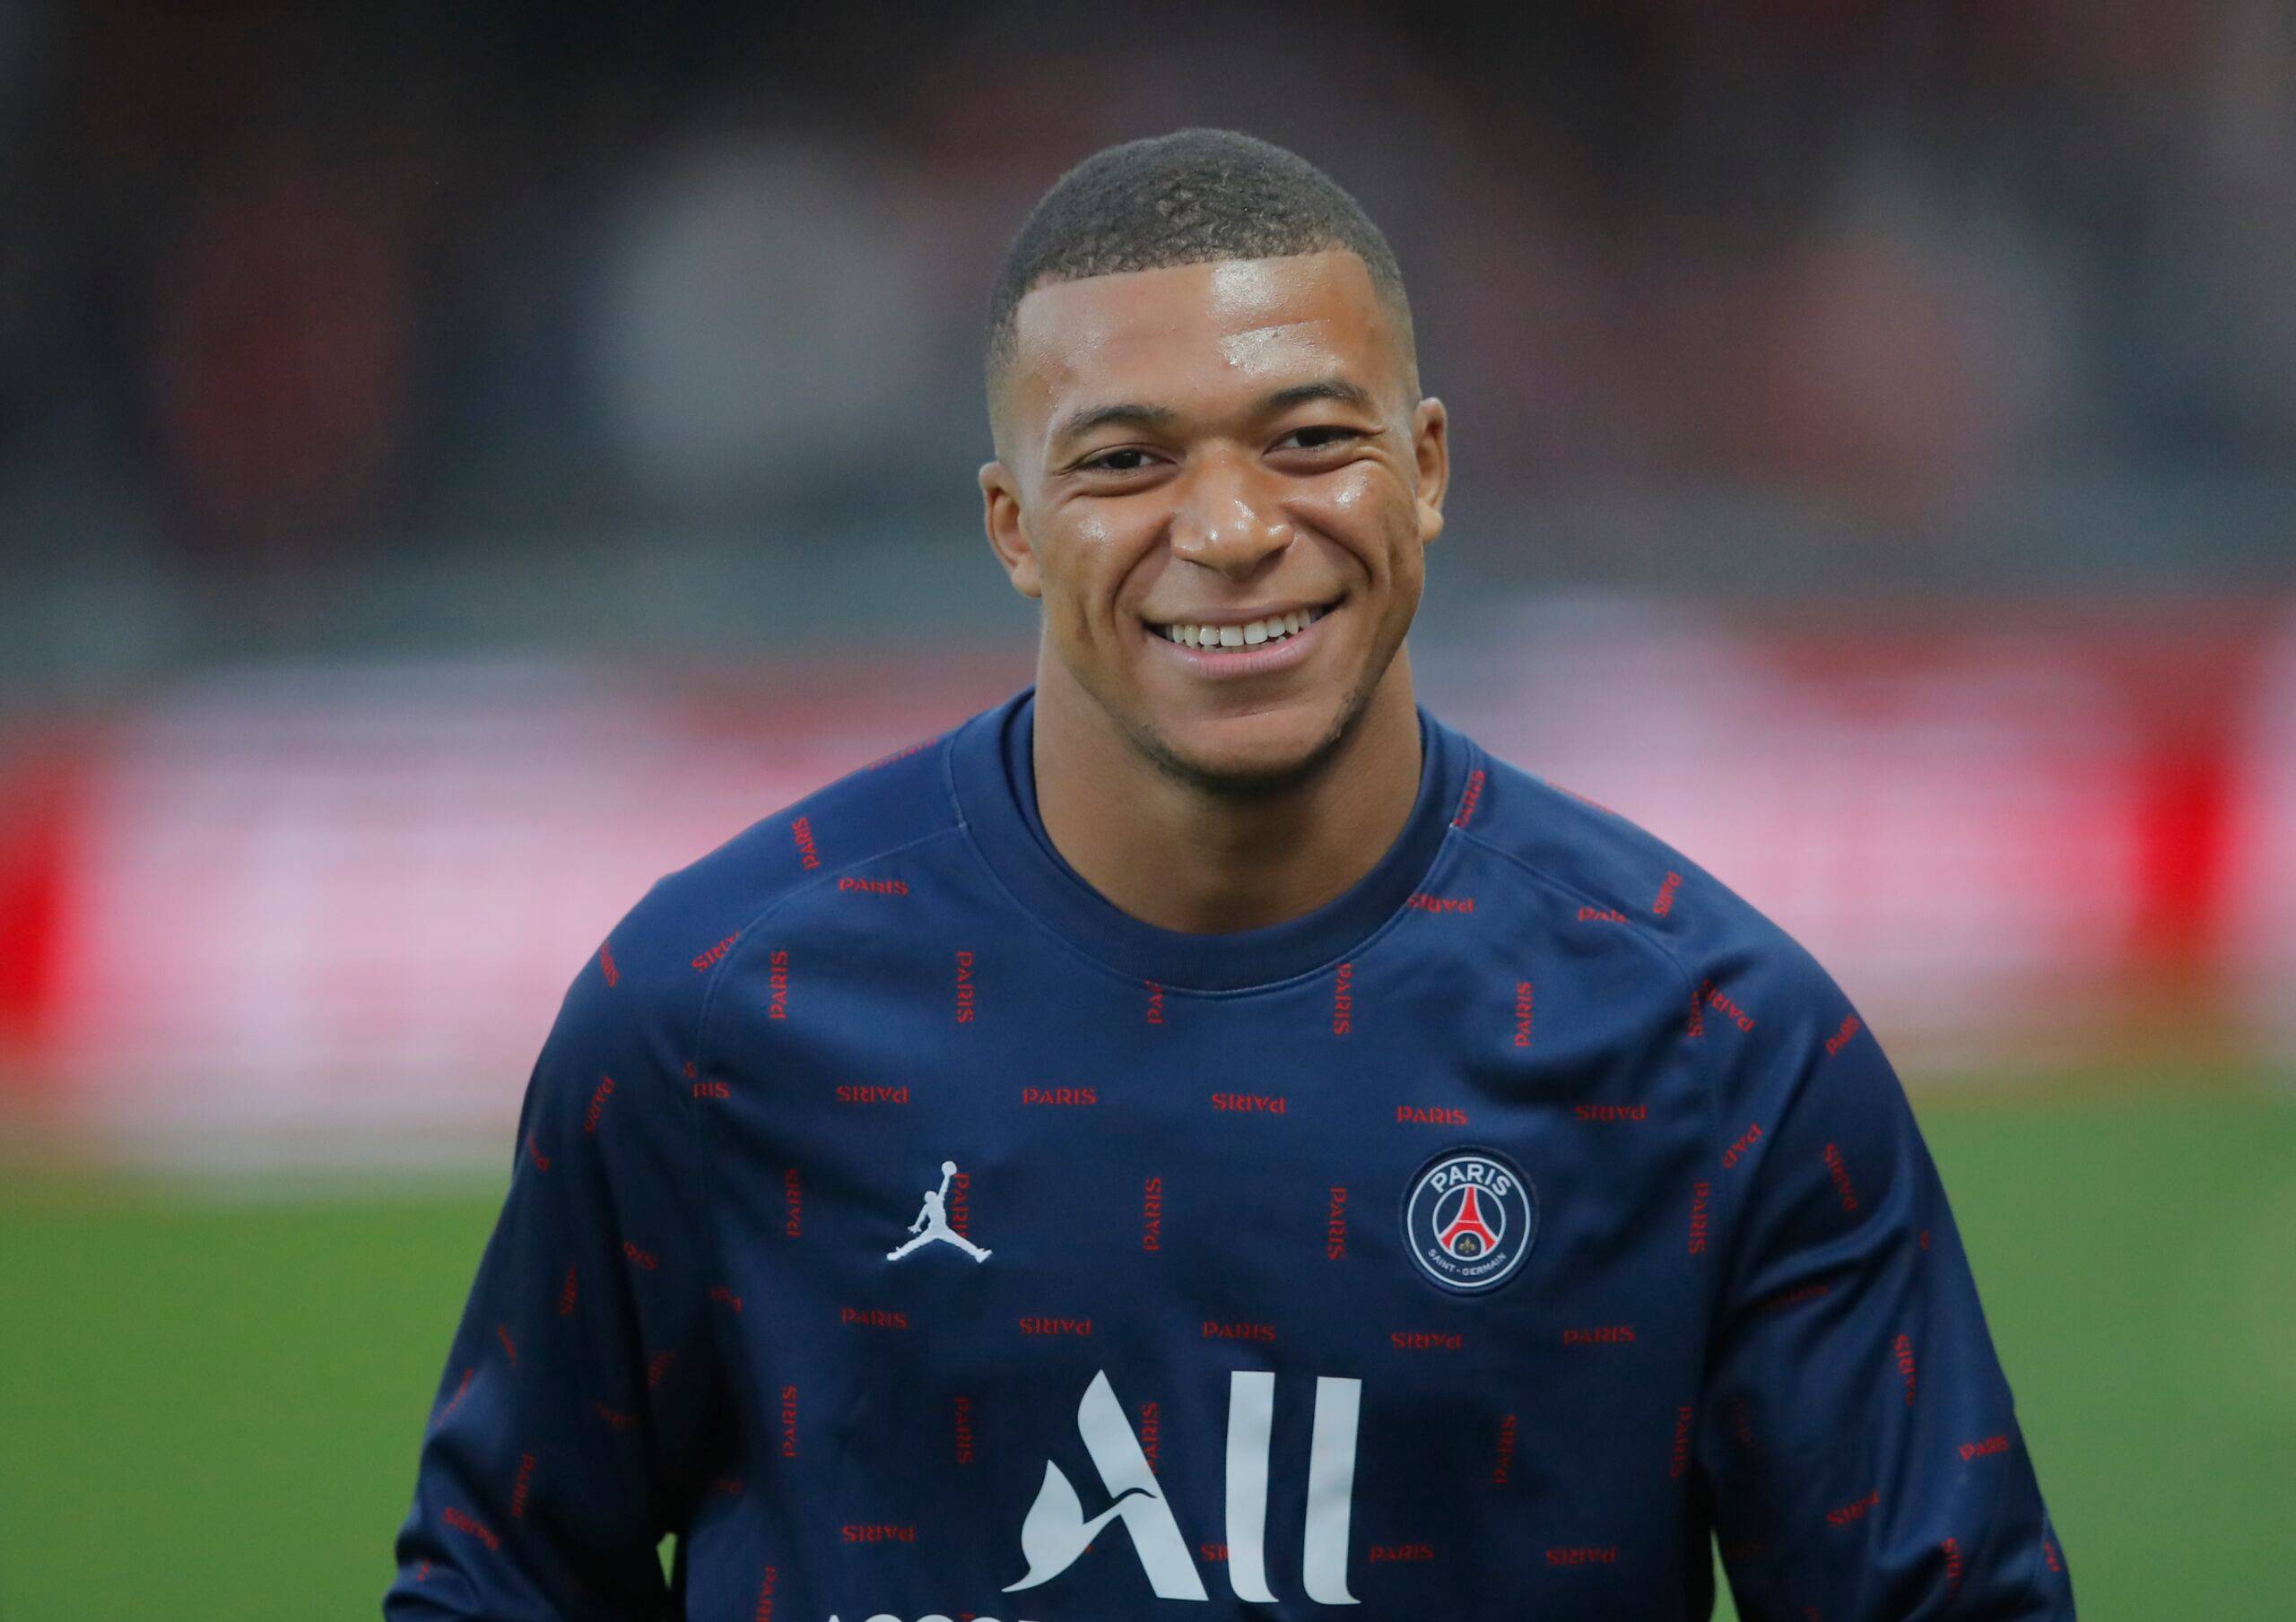 Kylian Mbappe has decided to leave PSG and join Real Madrid, according to Marca